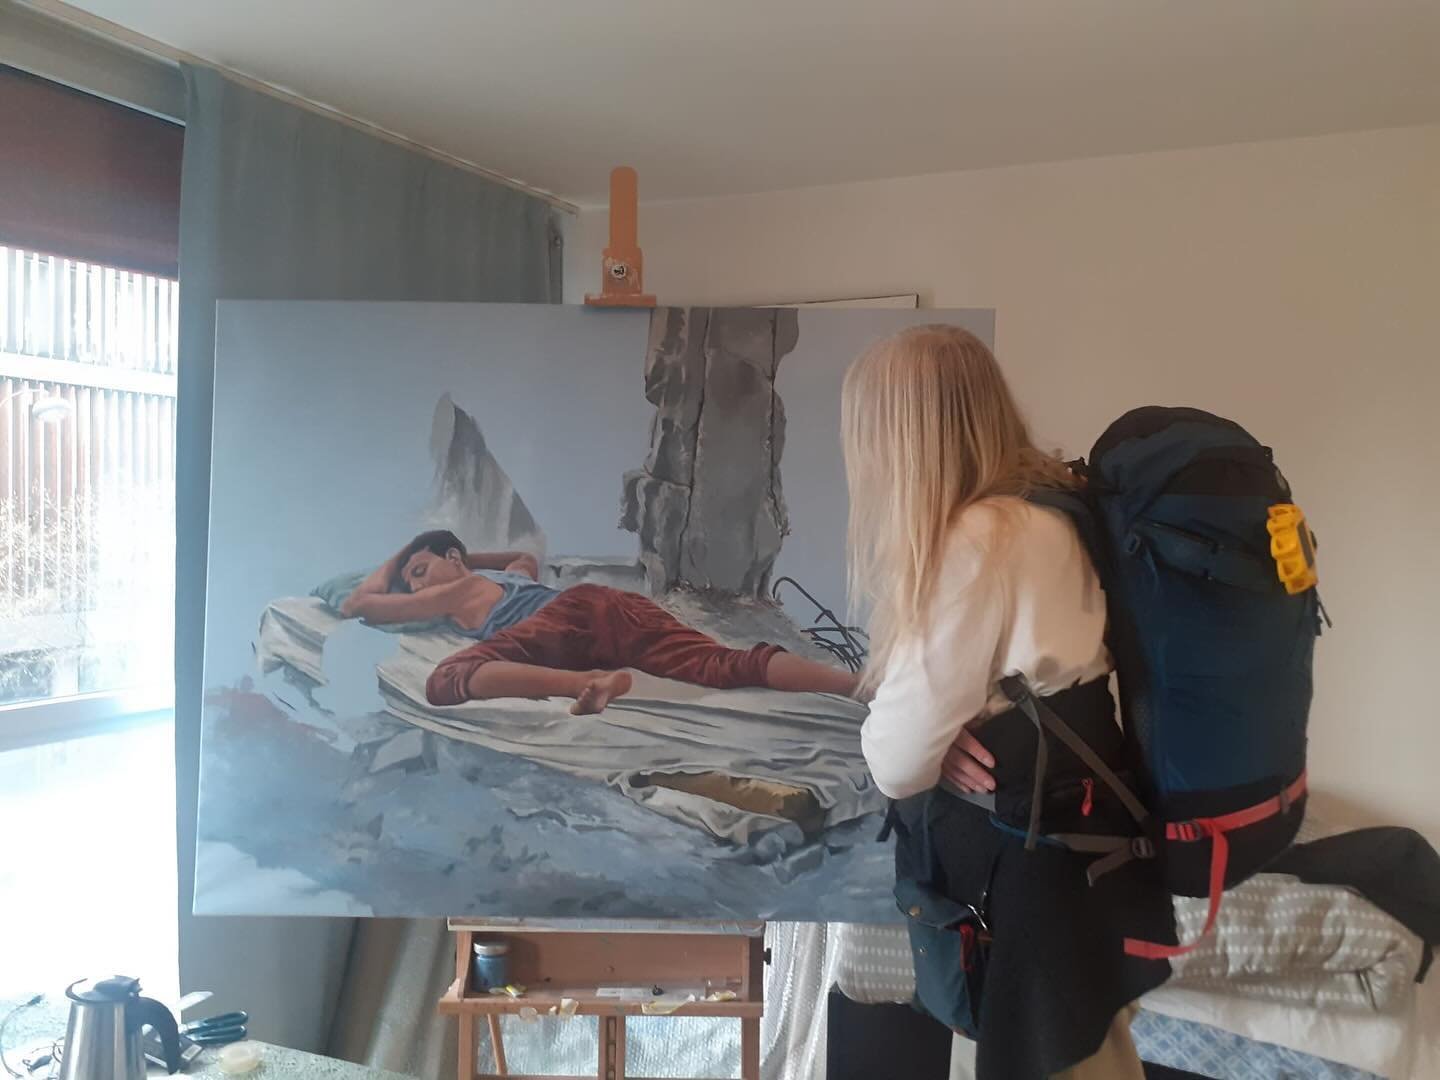 Last month I did a stopover in Paris when training back home from Munich.

This gave me the great honour of visiting artist @may_murad_artworks studio who was an artist in residence in collaboration with @rachelbrideashton with us at @deveronprojects